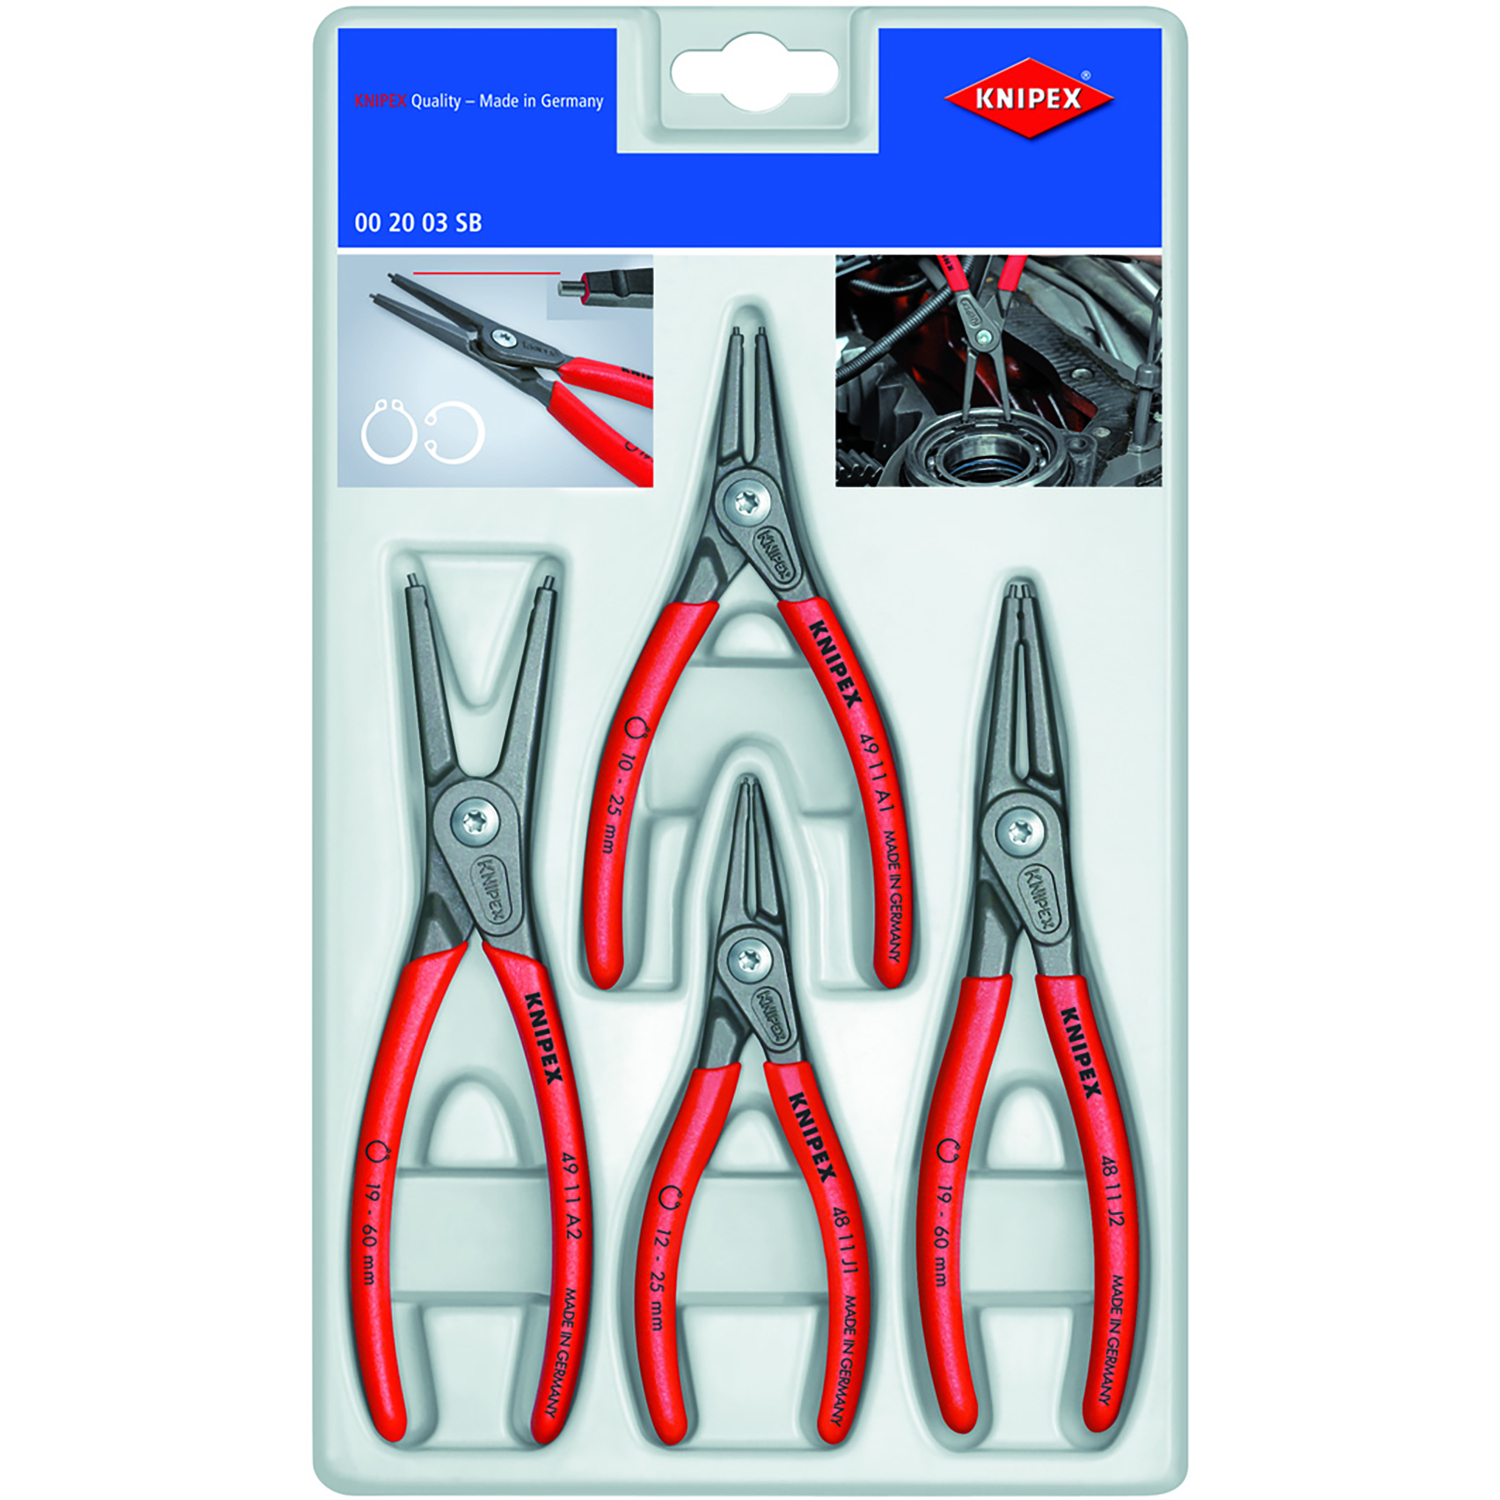 Knipex 4 pc Steel Percision Circlip Pliers Set - Ace Hardware